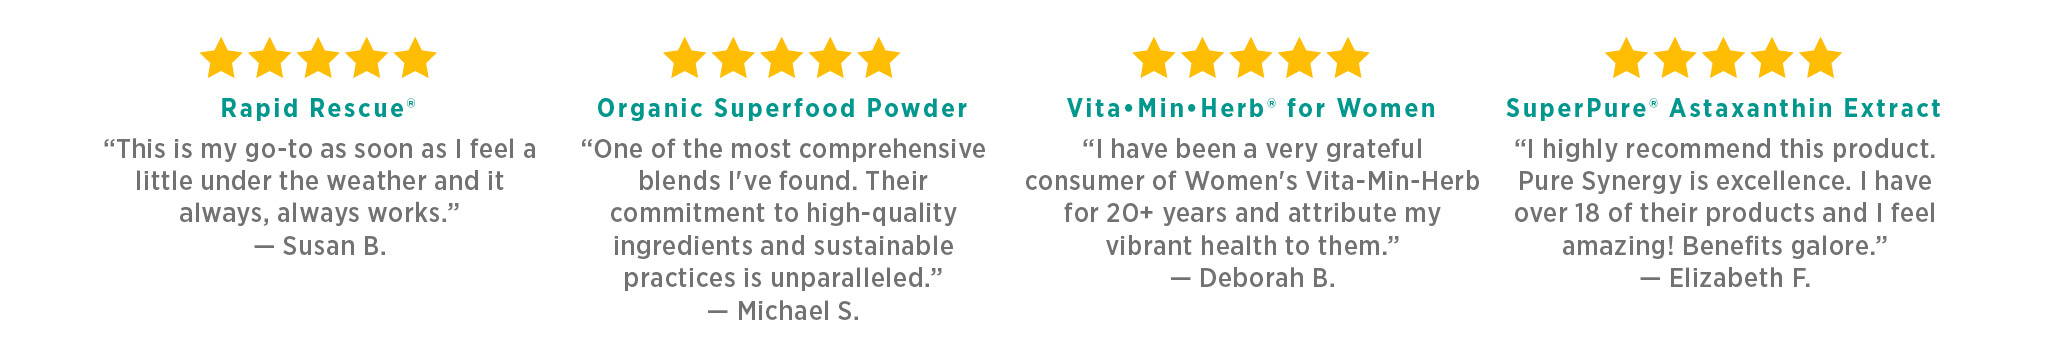 5-Star Reviews: “This is my go-to as soon as I feel a little under the weather and it always, always works.” – Susan B. | Rapid Rescue®. “One of the most comprehensive blends I've found. Their commitment to high-quality ingredients and sustainable practices is unparalleled.” – Micheal S. | Organic Superfood Powder. I have been a very grateful consumer of Women's Vita-Min-Herb for 20+ years and attribute my vibrant health to them. – Deborah B. | Vita•Min•Herb® for Women. I highly recommend this product. Pure Synergy is excellence. I have over 18 of their products and I feel amazing! Benefits galore. – Elizabeth F. | SuperPure® Astaxanthin Extract